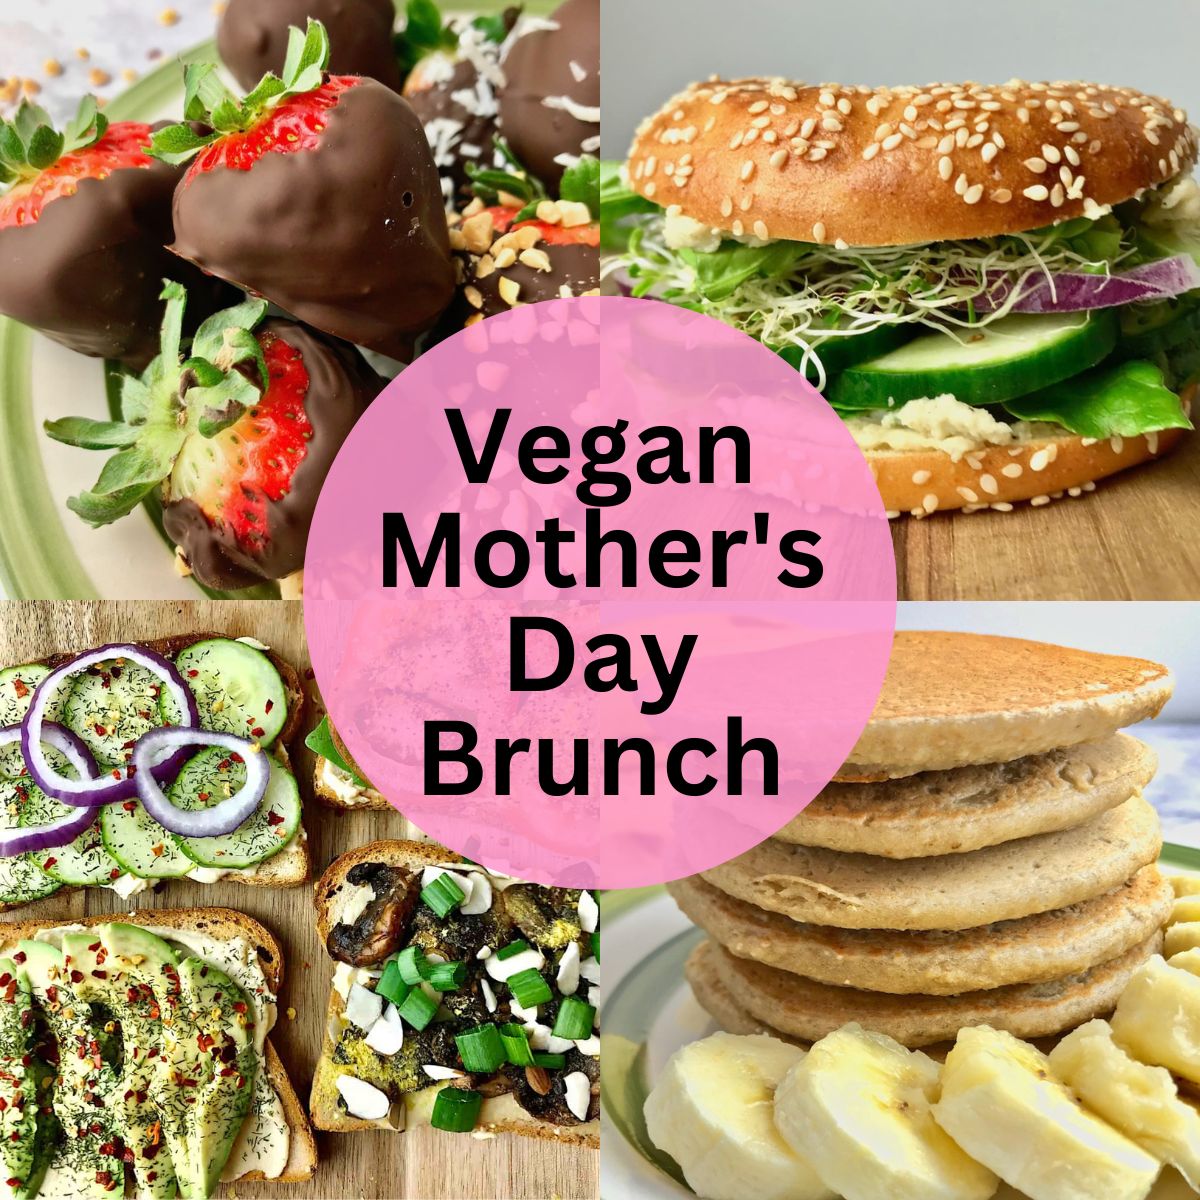 Chocolate covered strawberries, a bagel sandwich, hummus toast, and a stack of banana pancakes, with text that says Vegan Mother's Day Brunch.